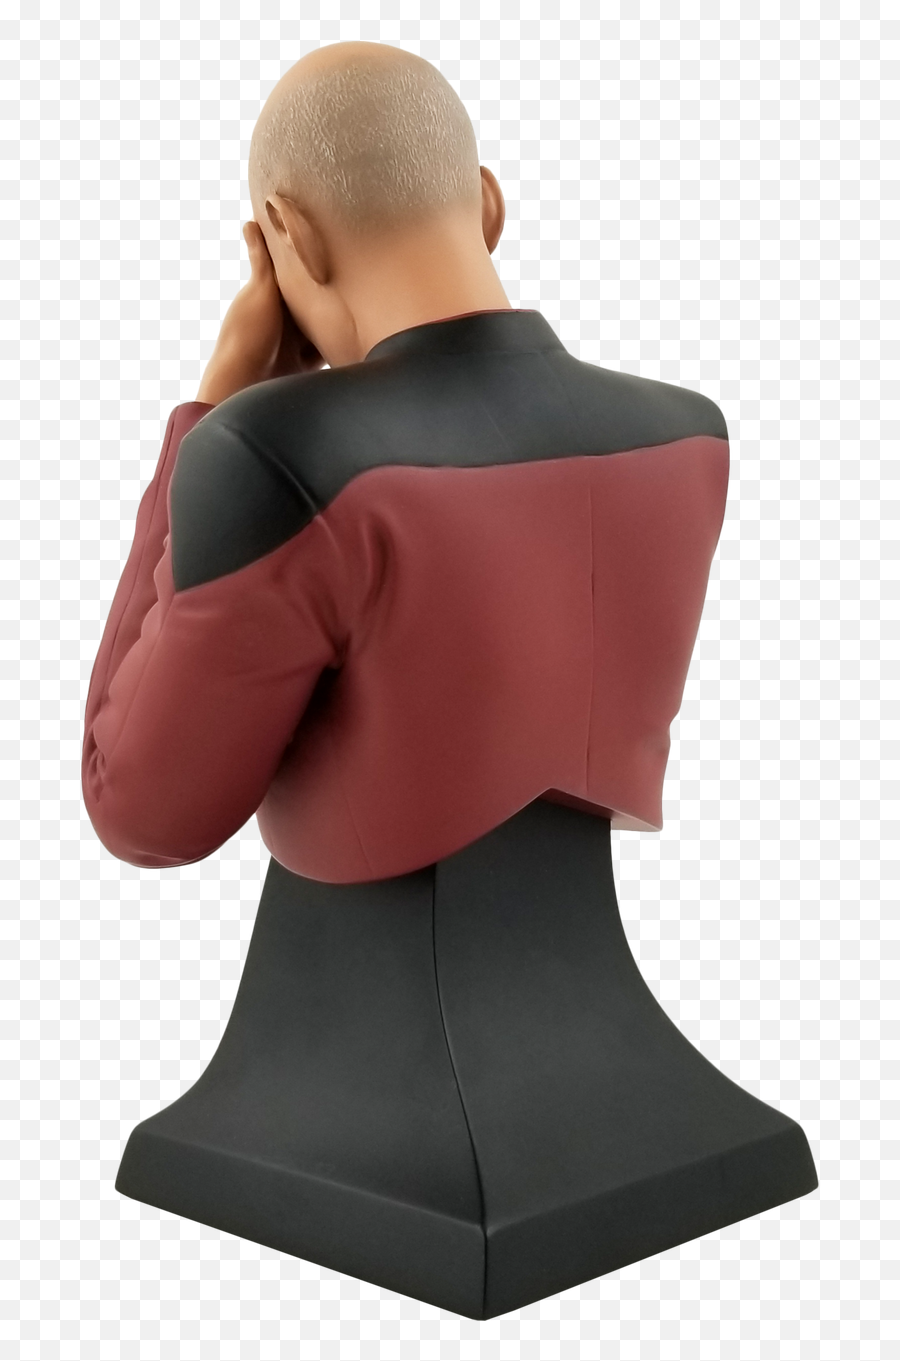 Star Trek The Next Generation Picard Facepalm Limited Edition Bust - San Diego Comiccon 2020 Previews Exclusive 2020 San Diego Png,Star Trek Icon Pack